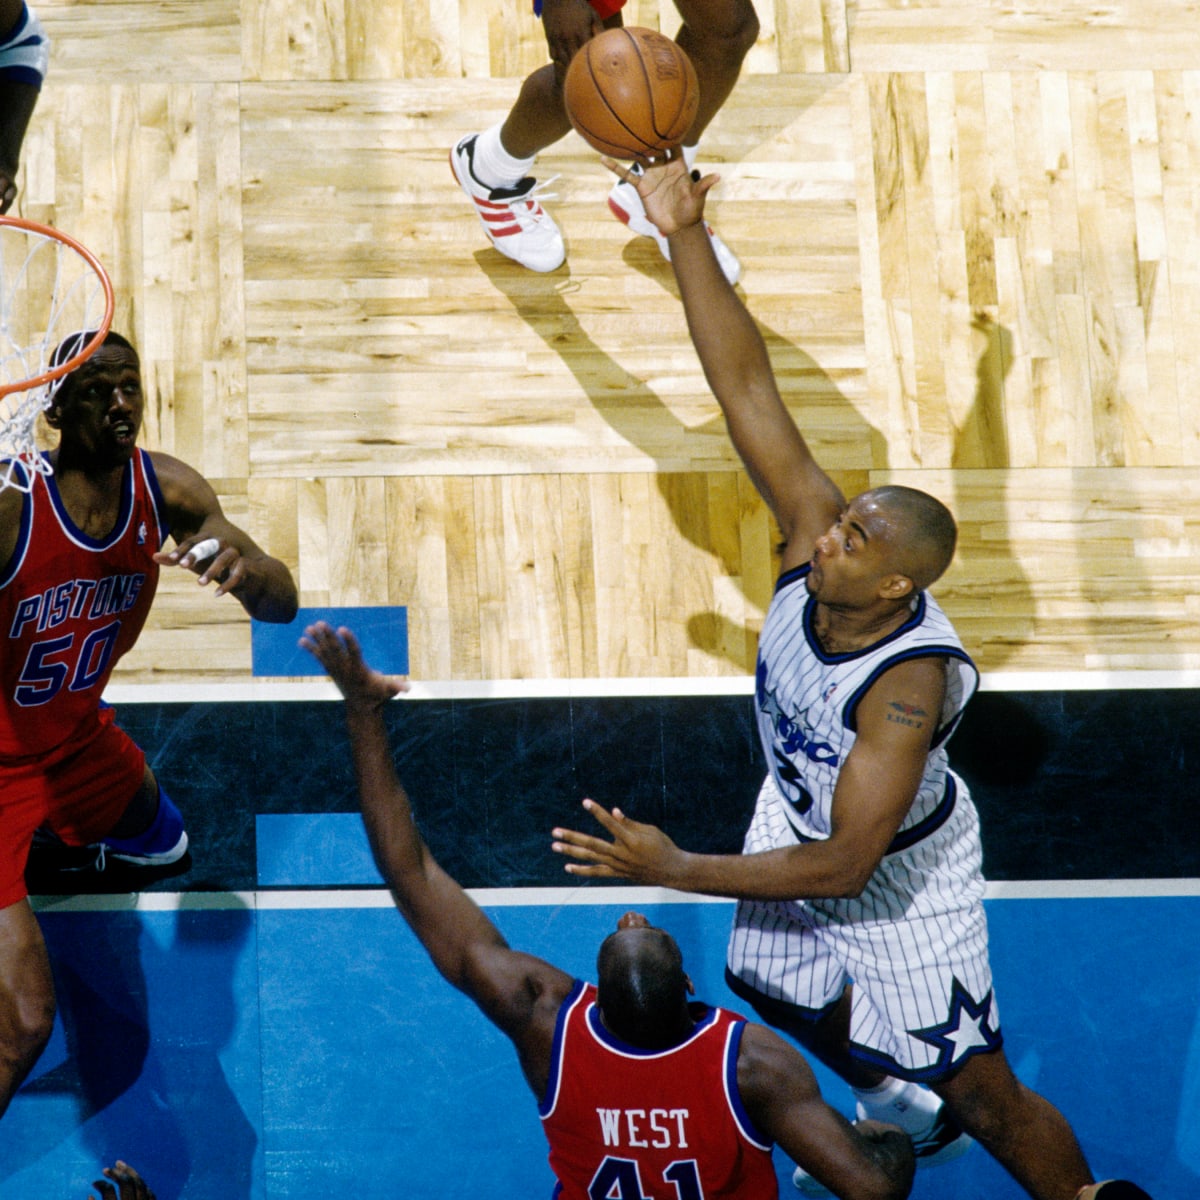 Dennis Scott to be inducted into Orlando Magic Hall of Fame this week